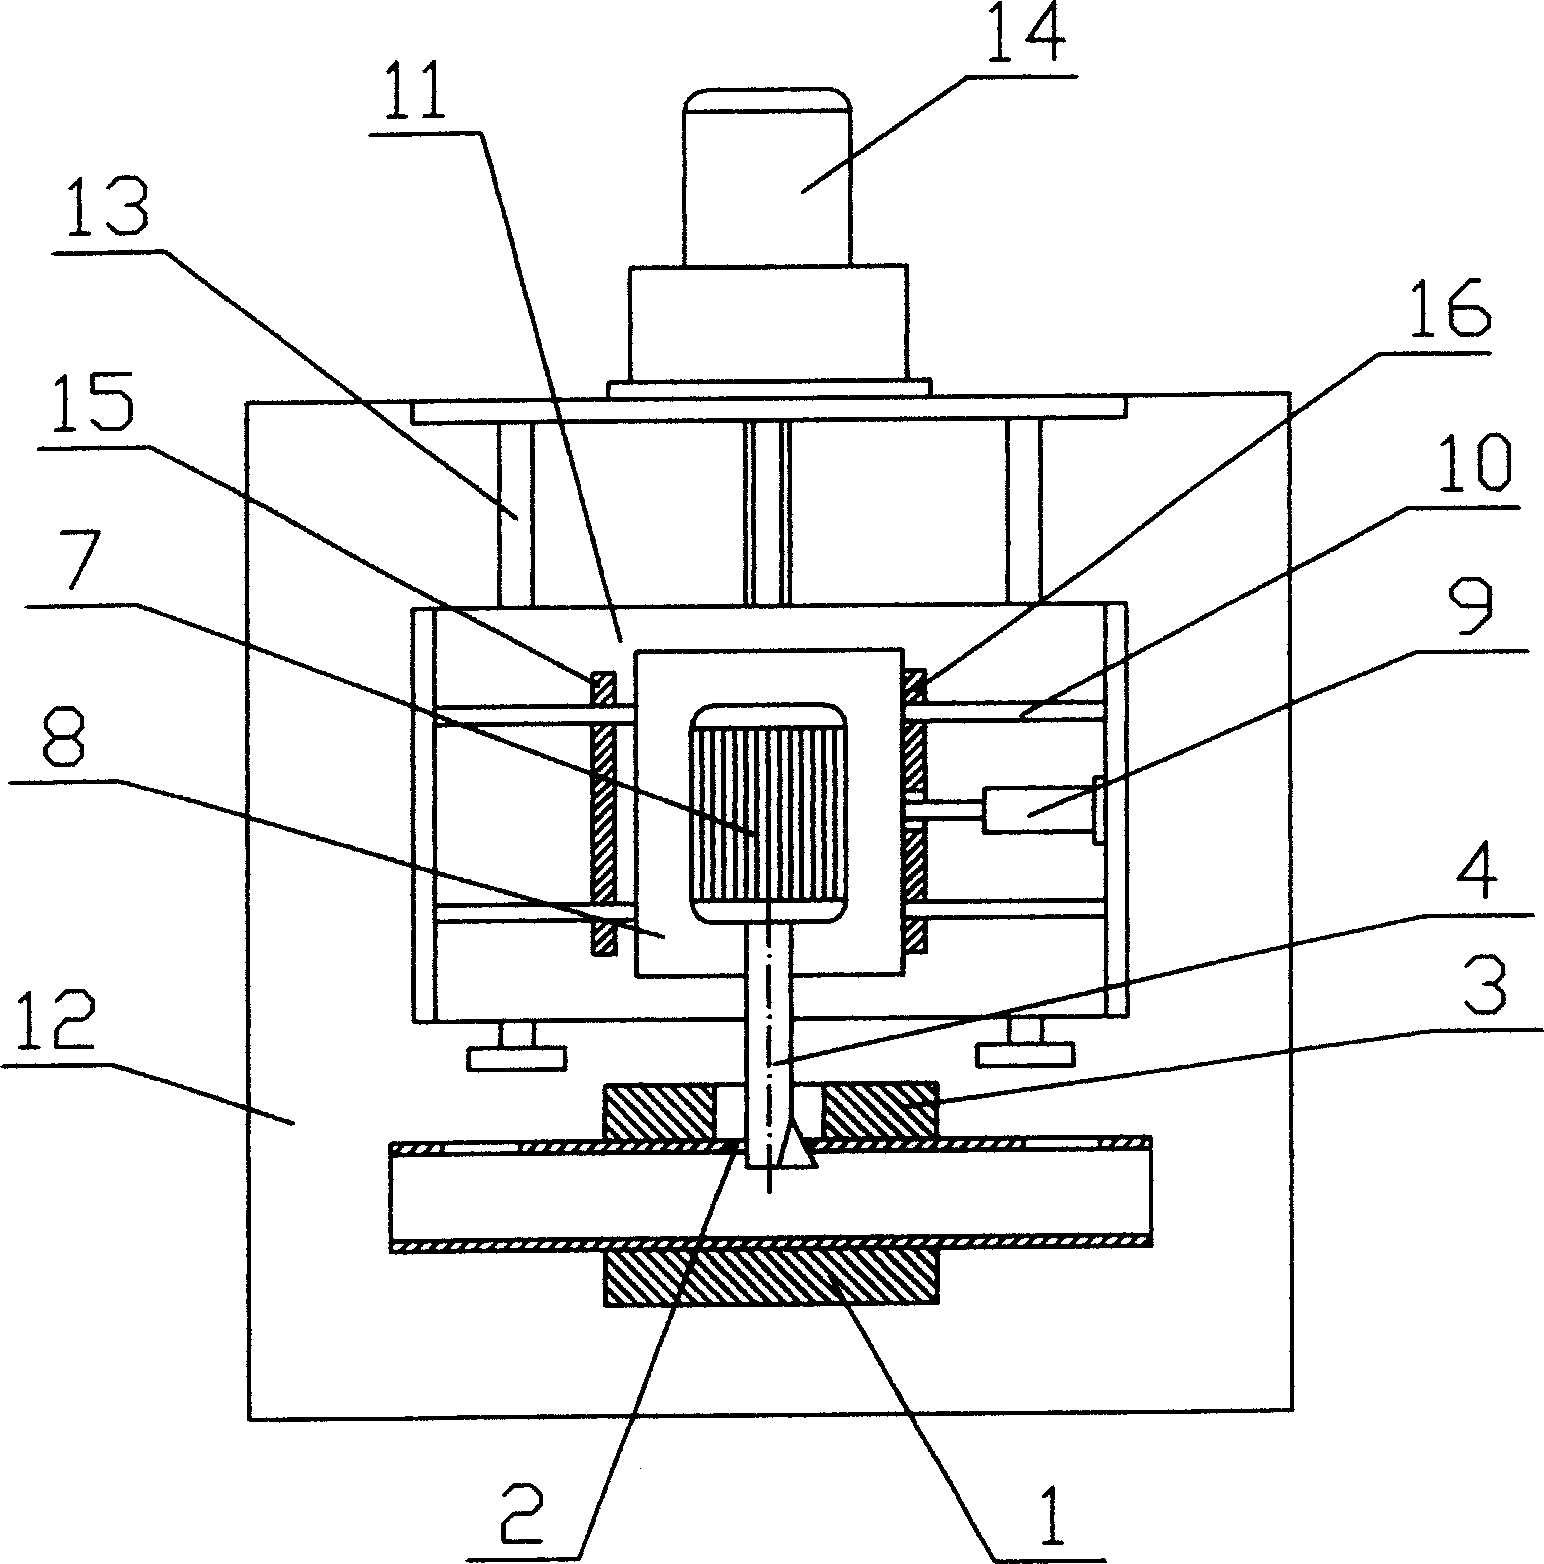 Flanging arrangement for wall hole of thin metal pipe